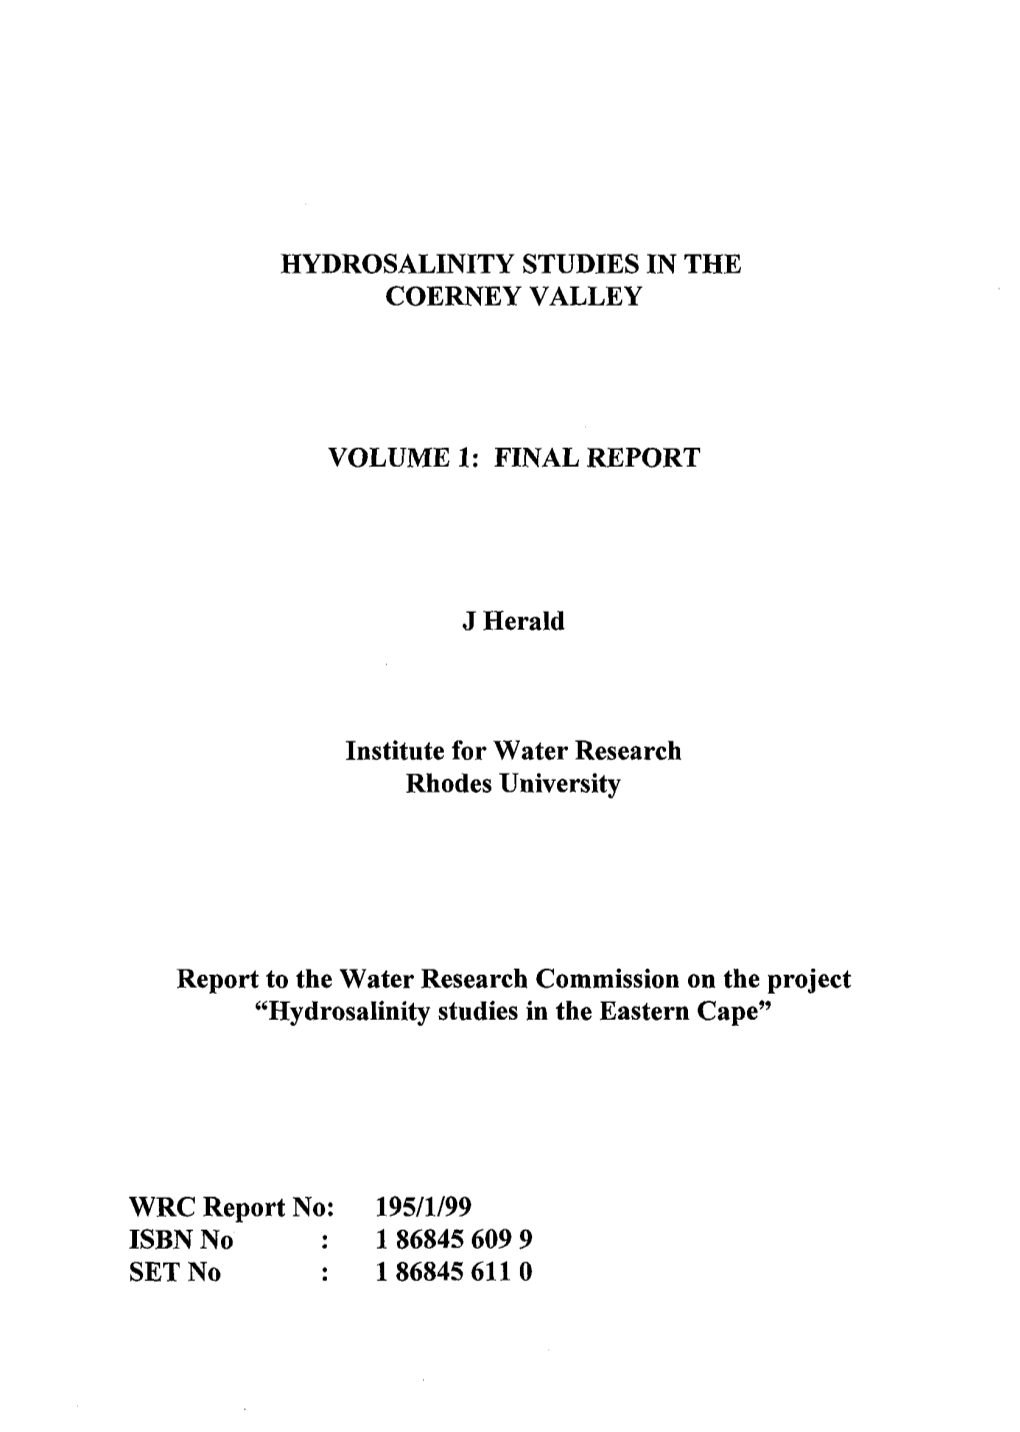 HYDROSALINITY STUDIES in the COERNEY VALLEY VOLUME 1: FINAL REPORT J Herald Institute for Water Research Rhodes University Repor